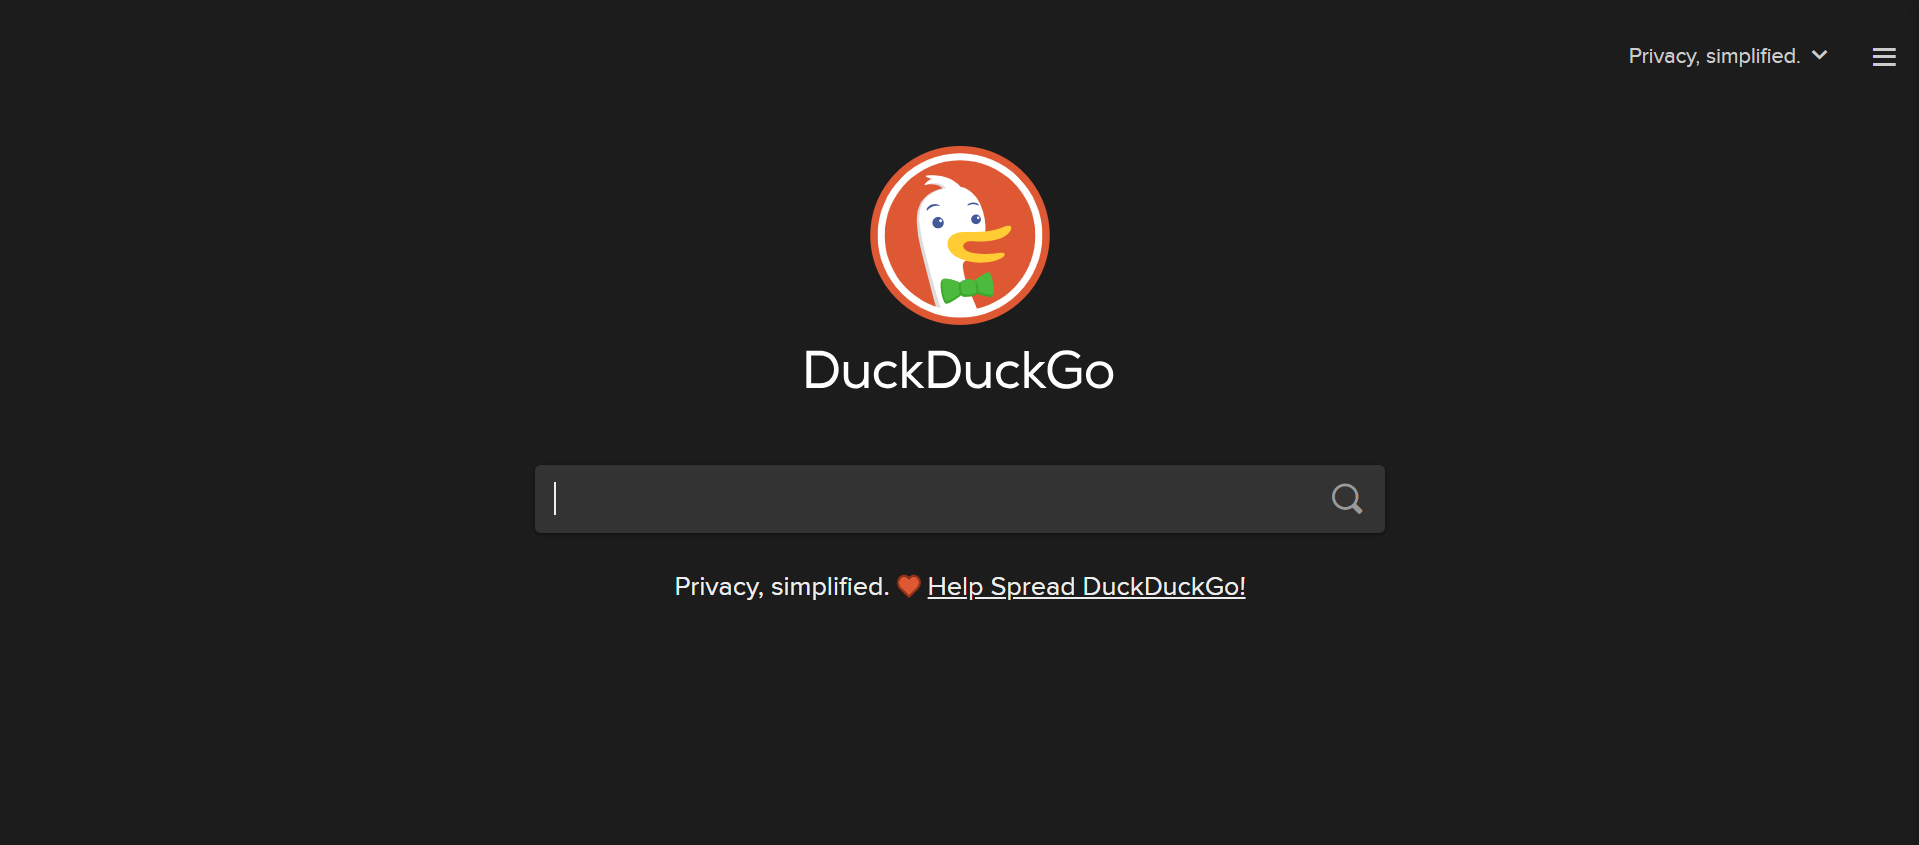 The DuckDuckGo Search Engine Homepage